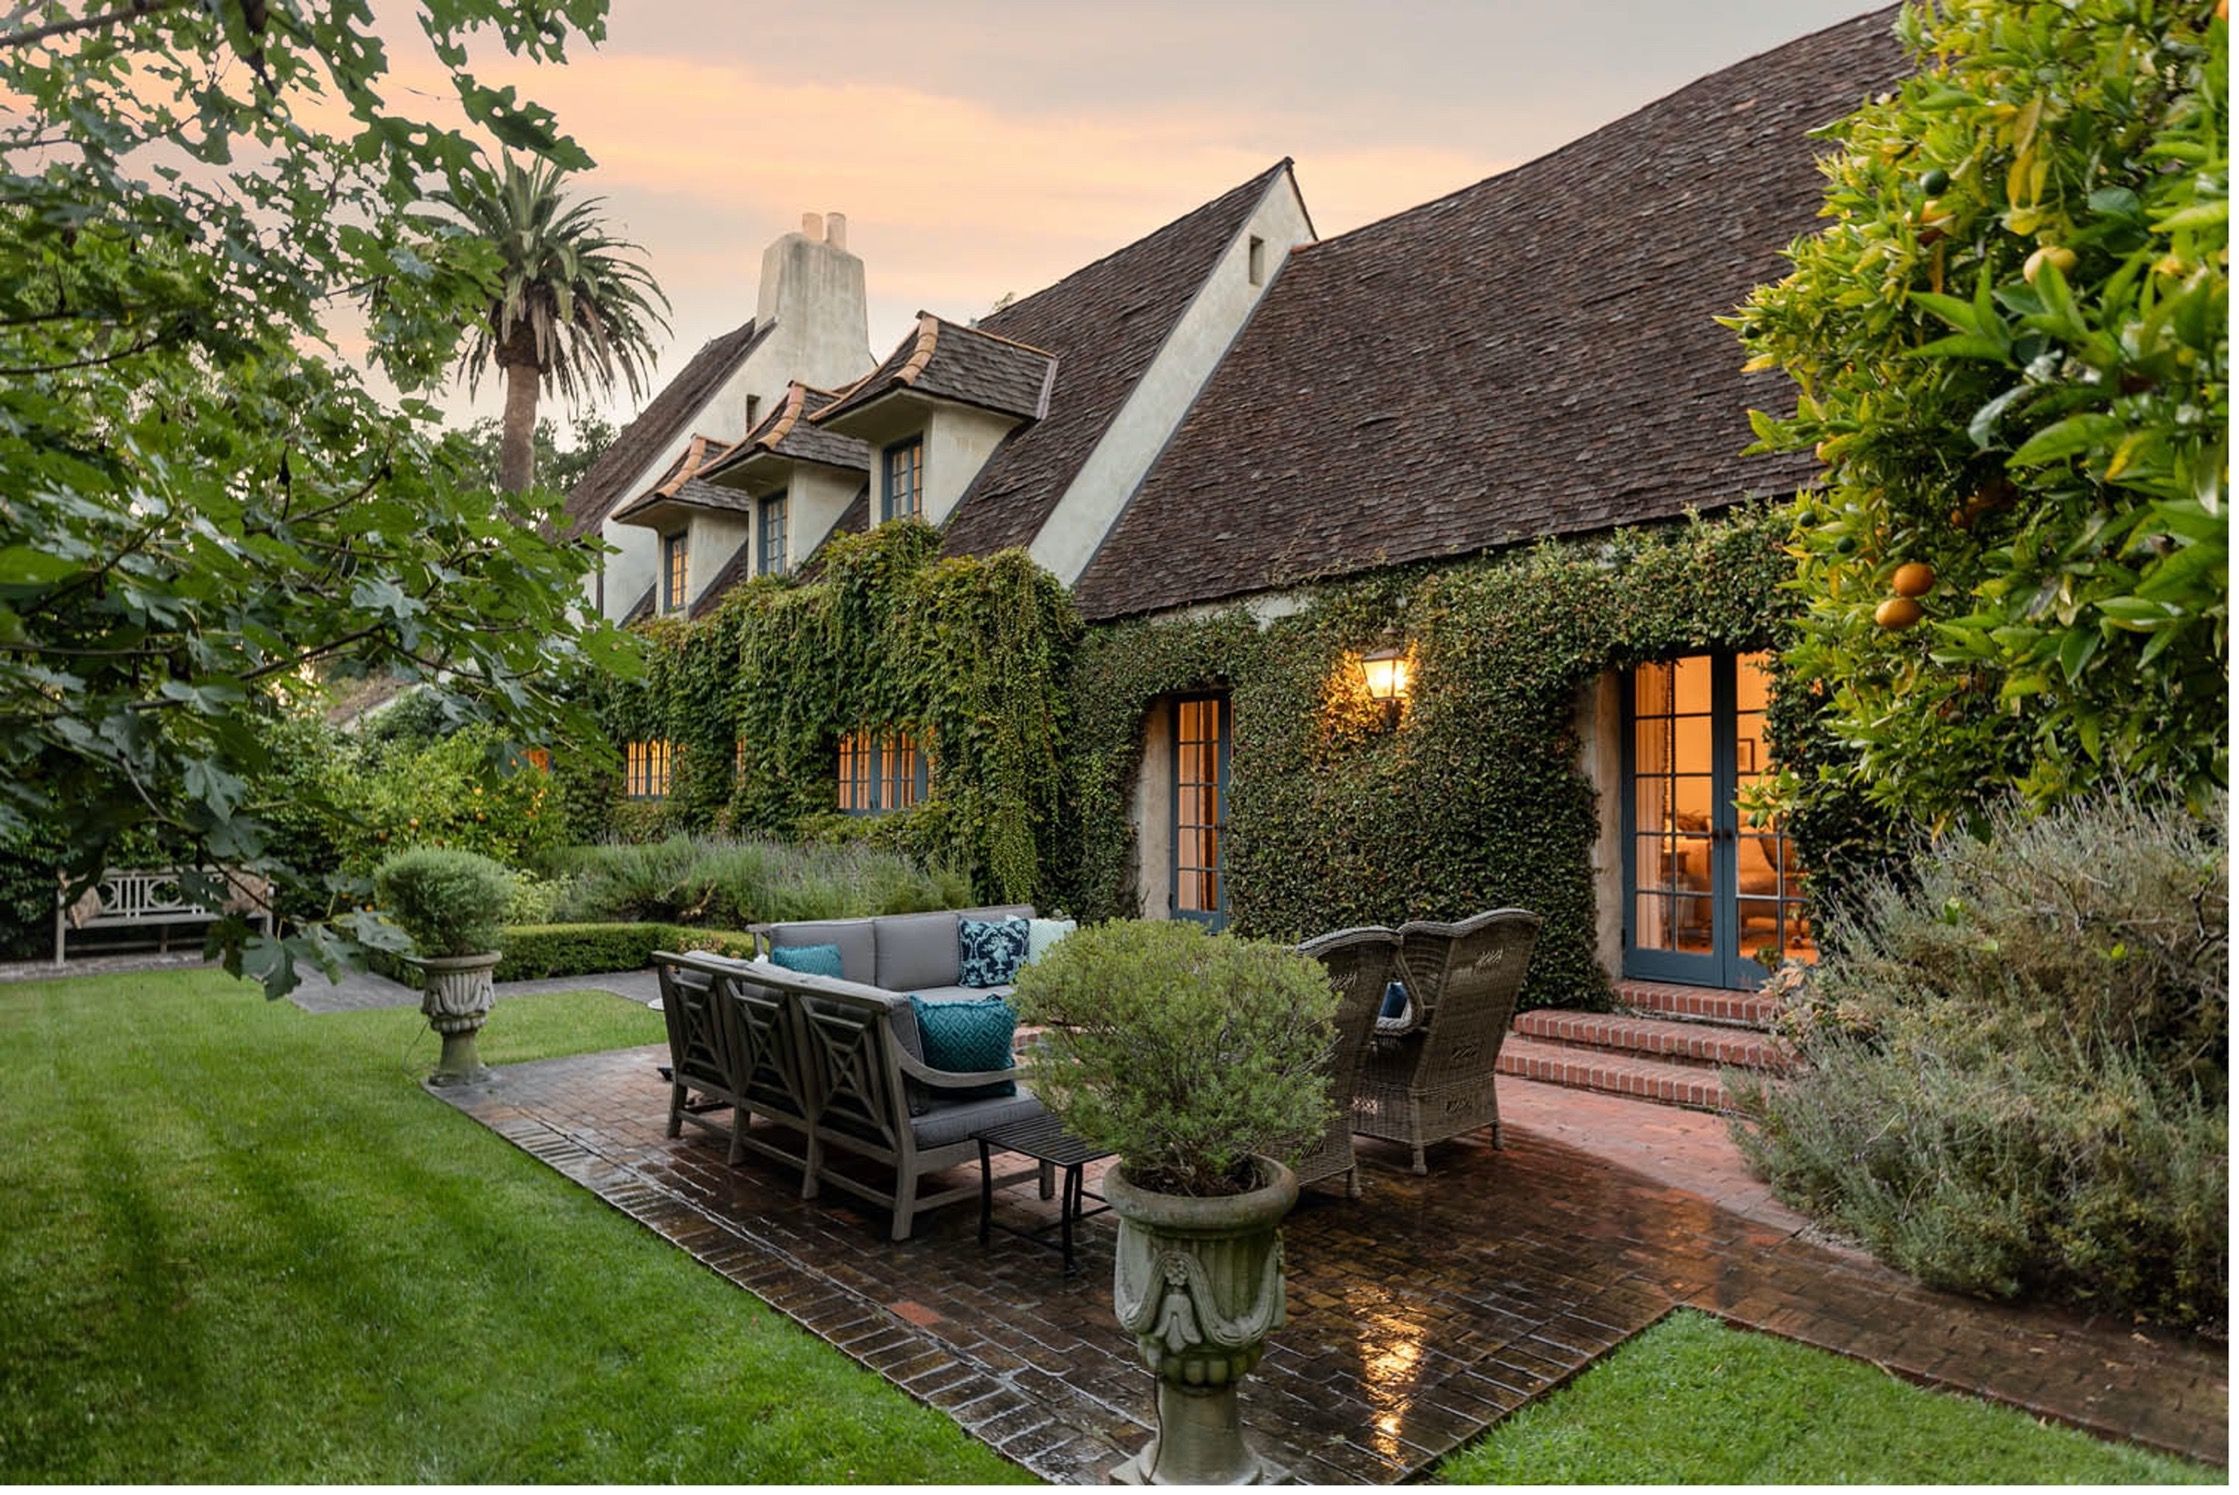 A substantial 2-story French Country-style residence with lush landscaping in Santa Barbara CA